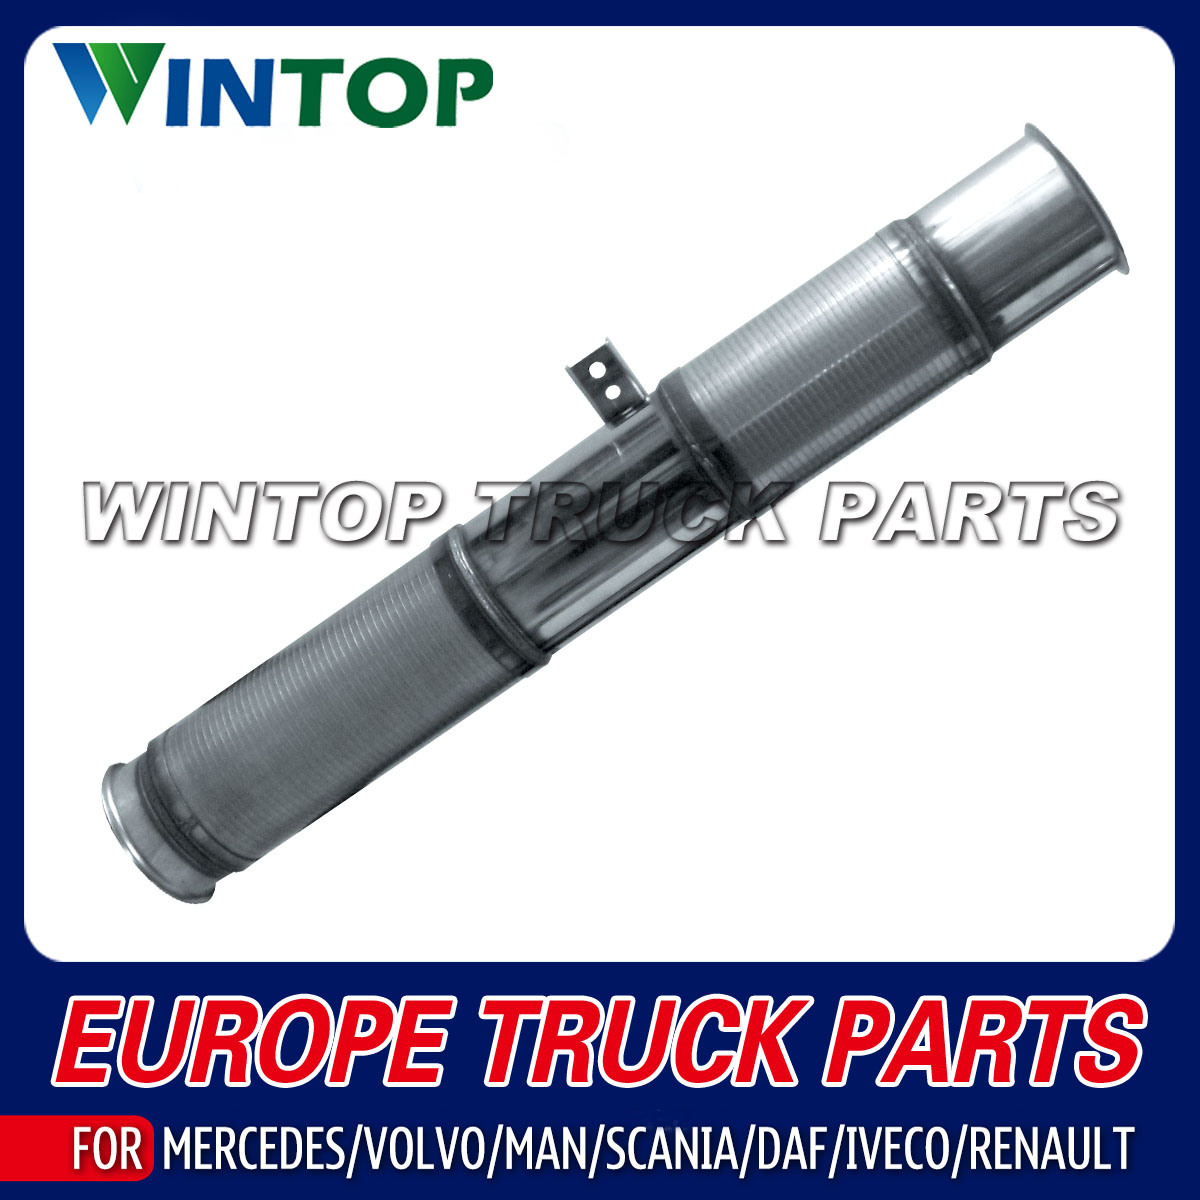 Exhaust Flexible Pipe for Scania Heavy Duty Truck Parts OEM No.: 1505749 1725993